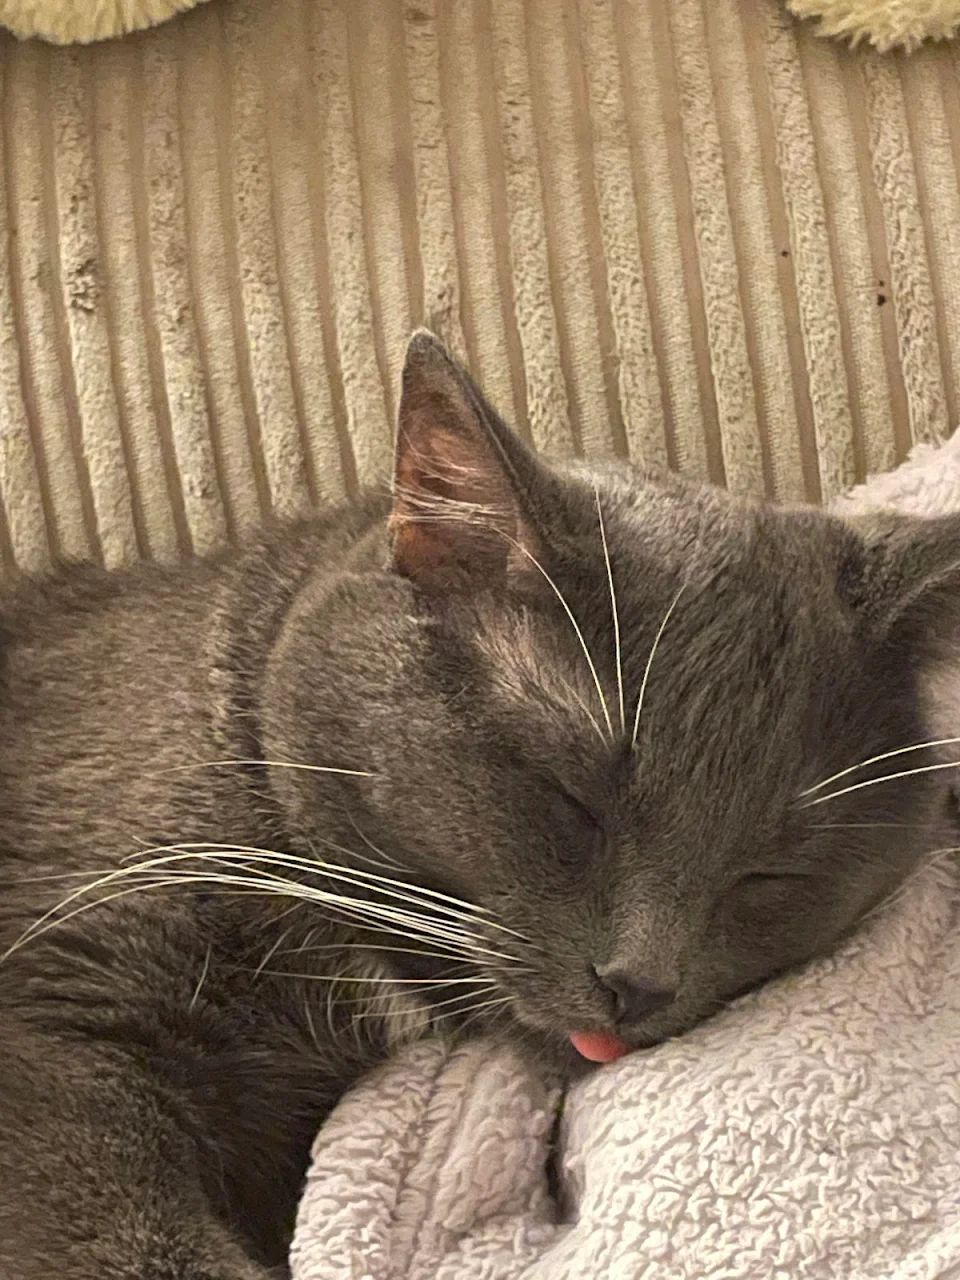 Looked over and my cat was sleeping with his tongue sticking out.